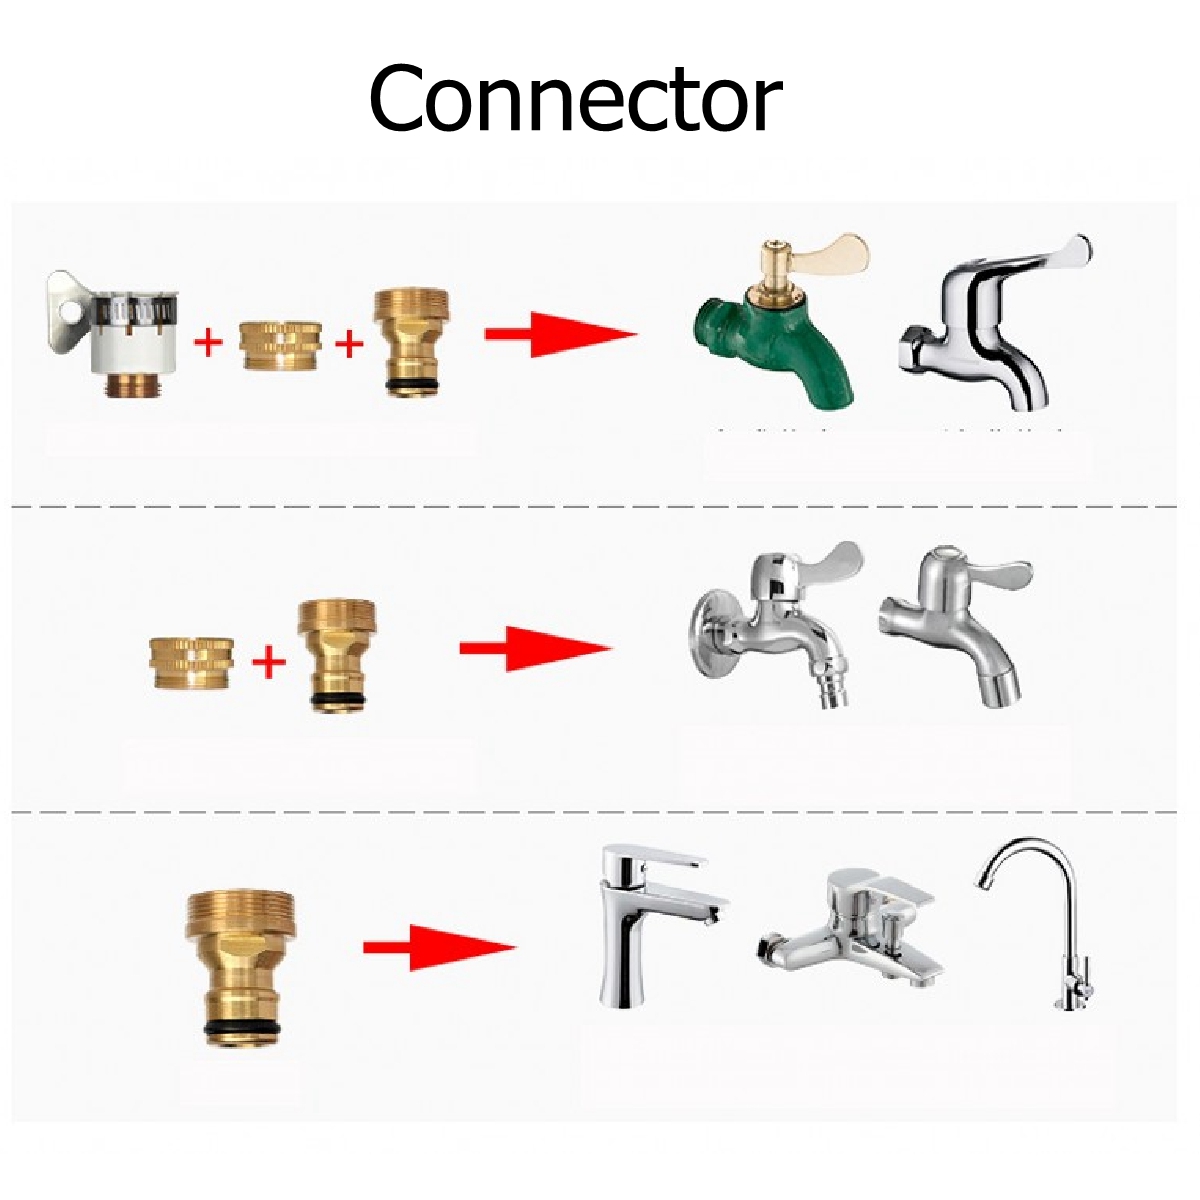 High-Pressure-Brass-Washer-Misting-Spray-Nozzle-Water-Adapter-Connector-Water-Hose-Pipe-Connectors-1537342